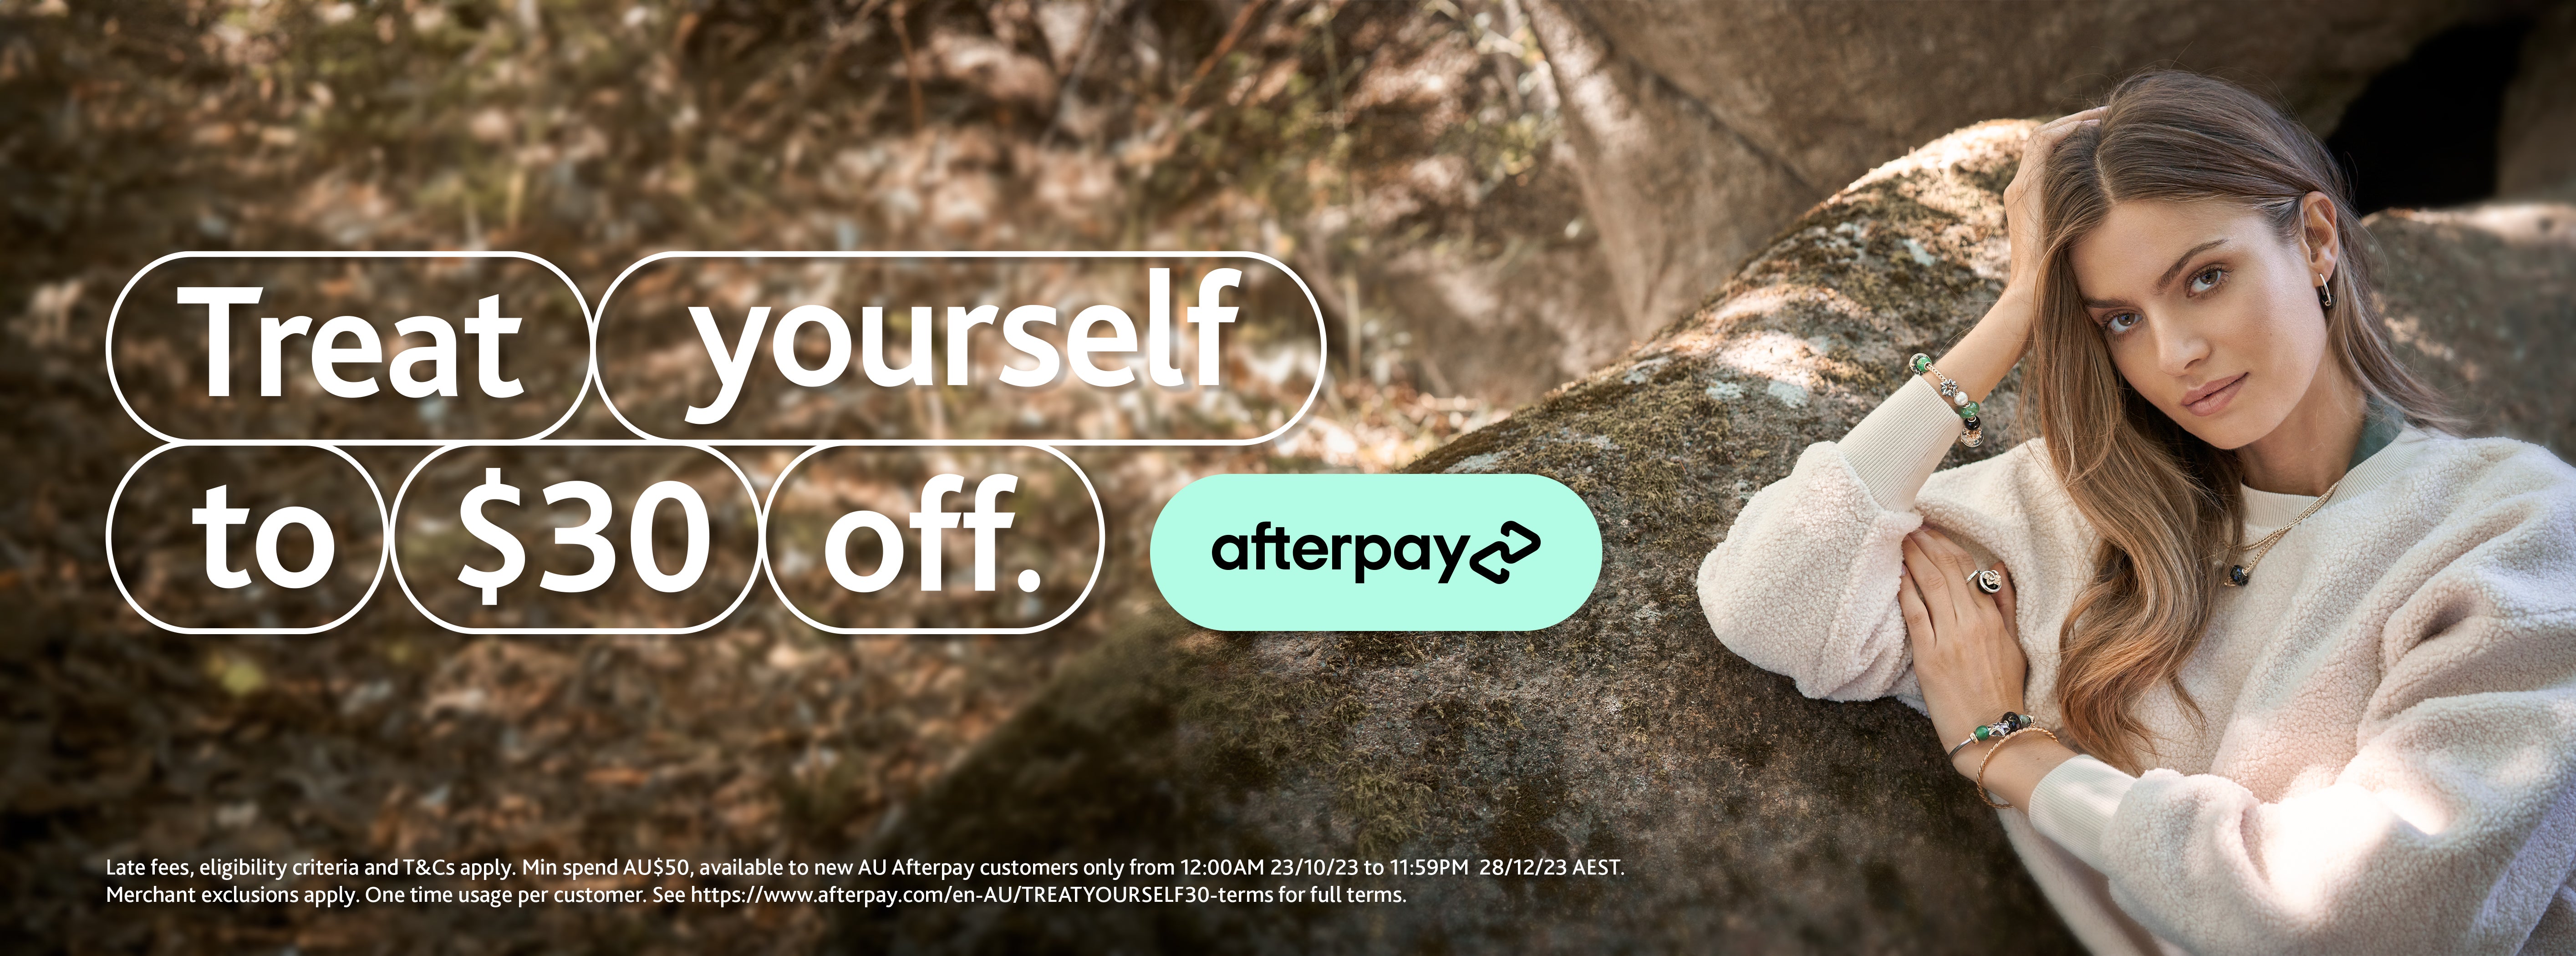 Afterpay Australia Exclusive Offer: $30 Off Your First Afterpay Purchase!